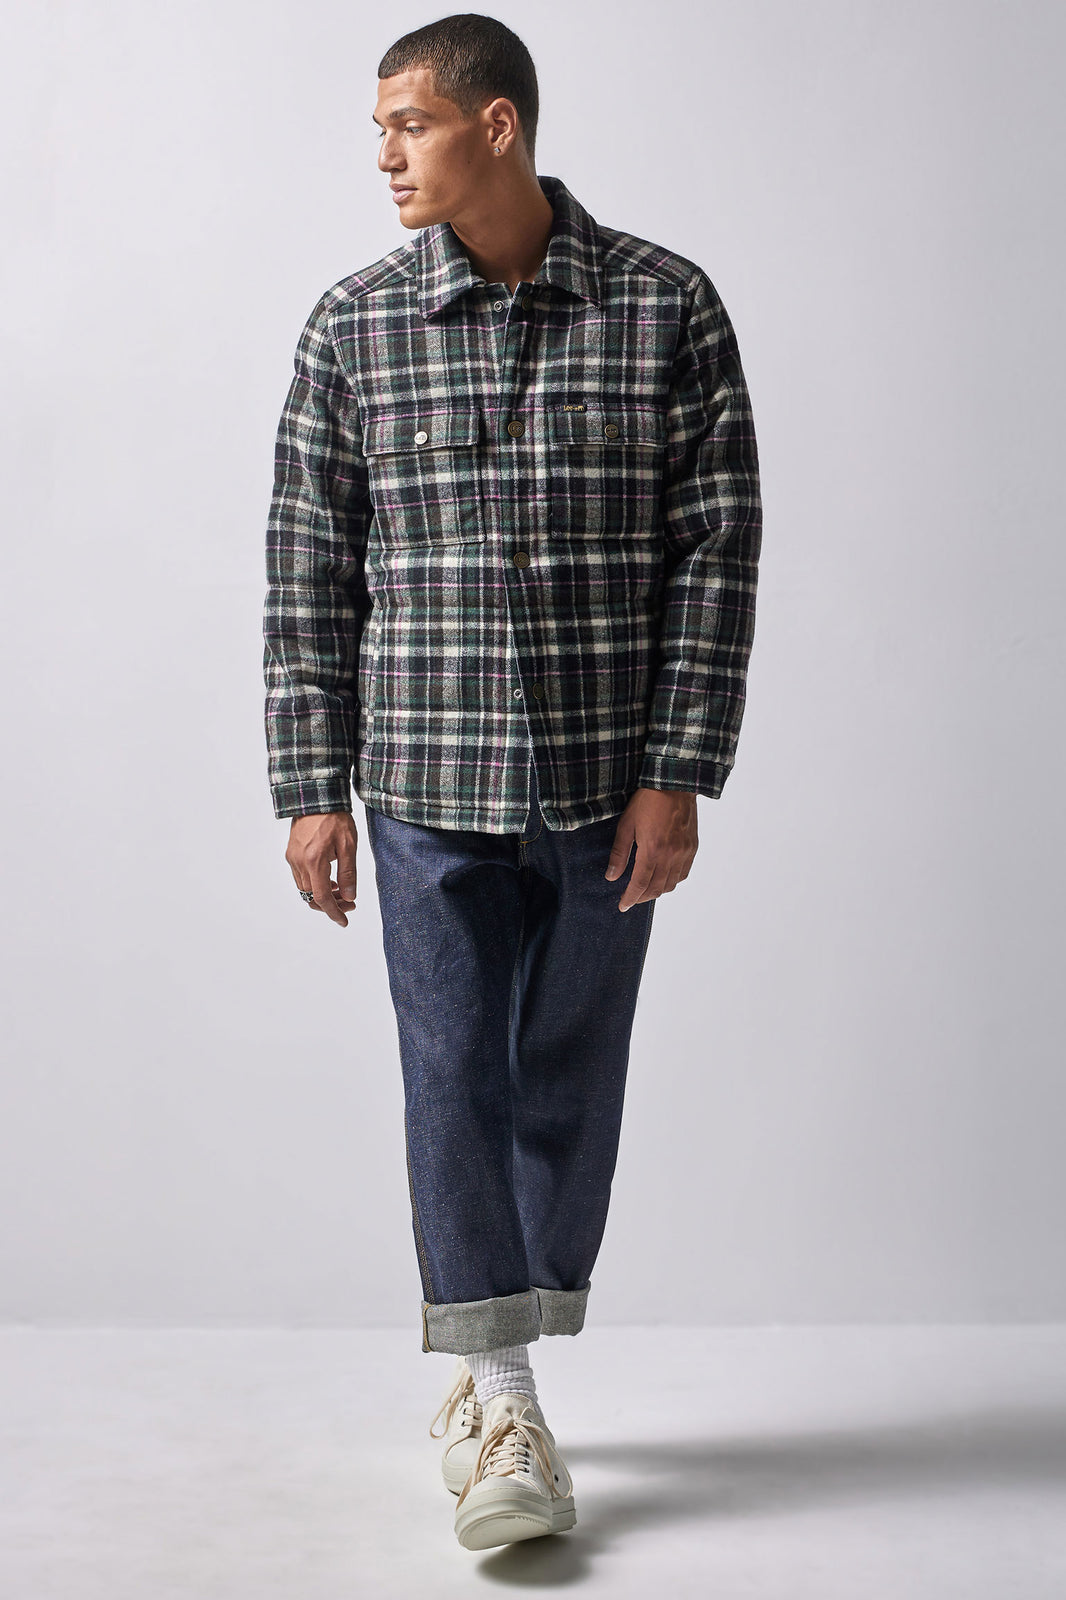 Lee x BKc Quilted Working West Overshirt (White Smoke Unionall Black Plaid)